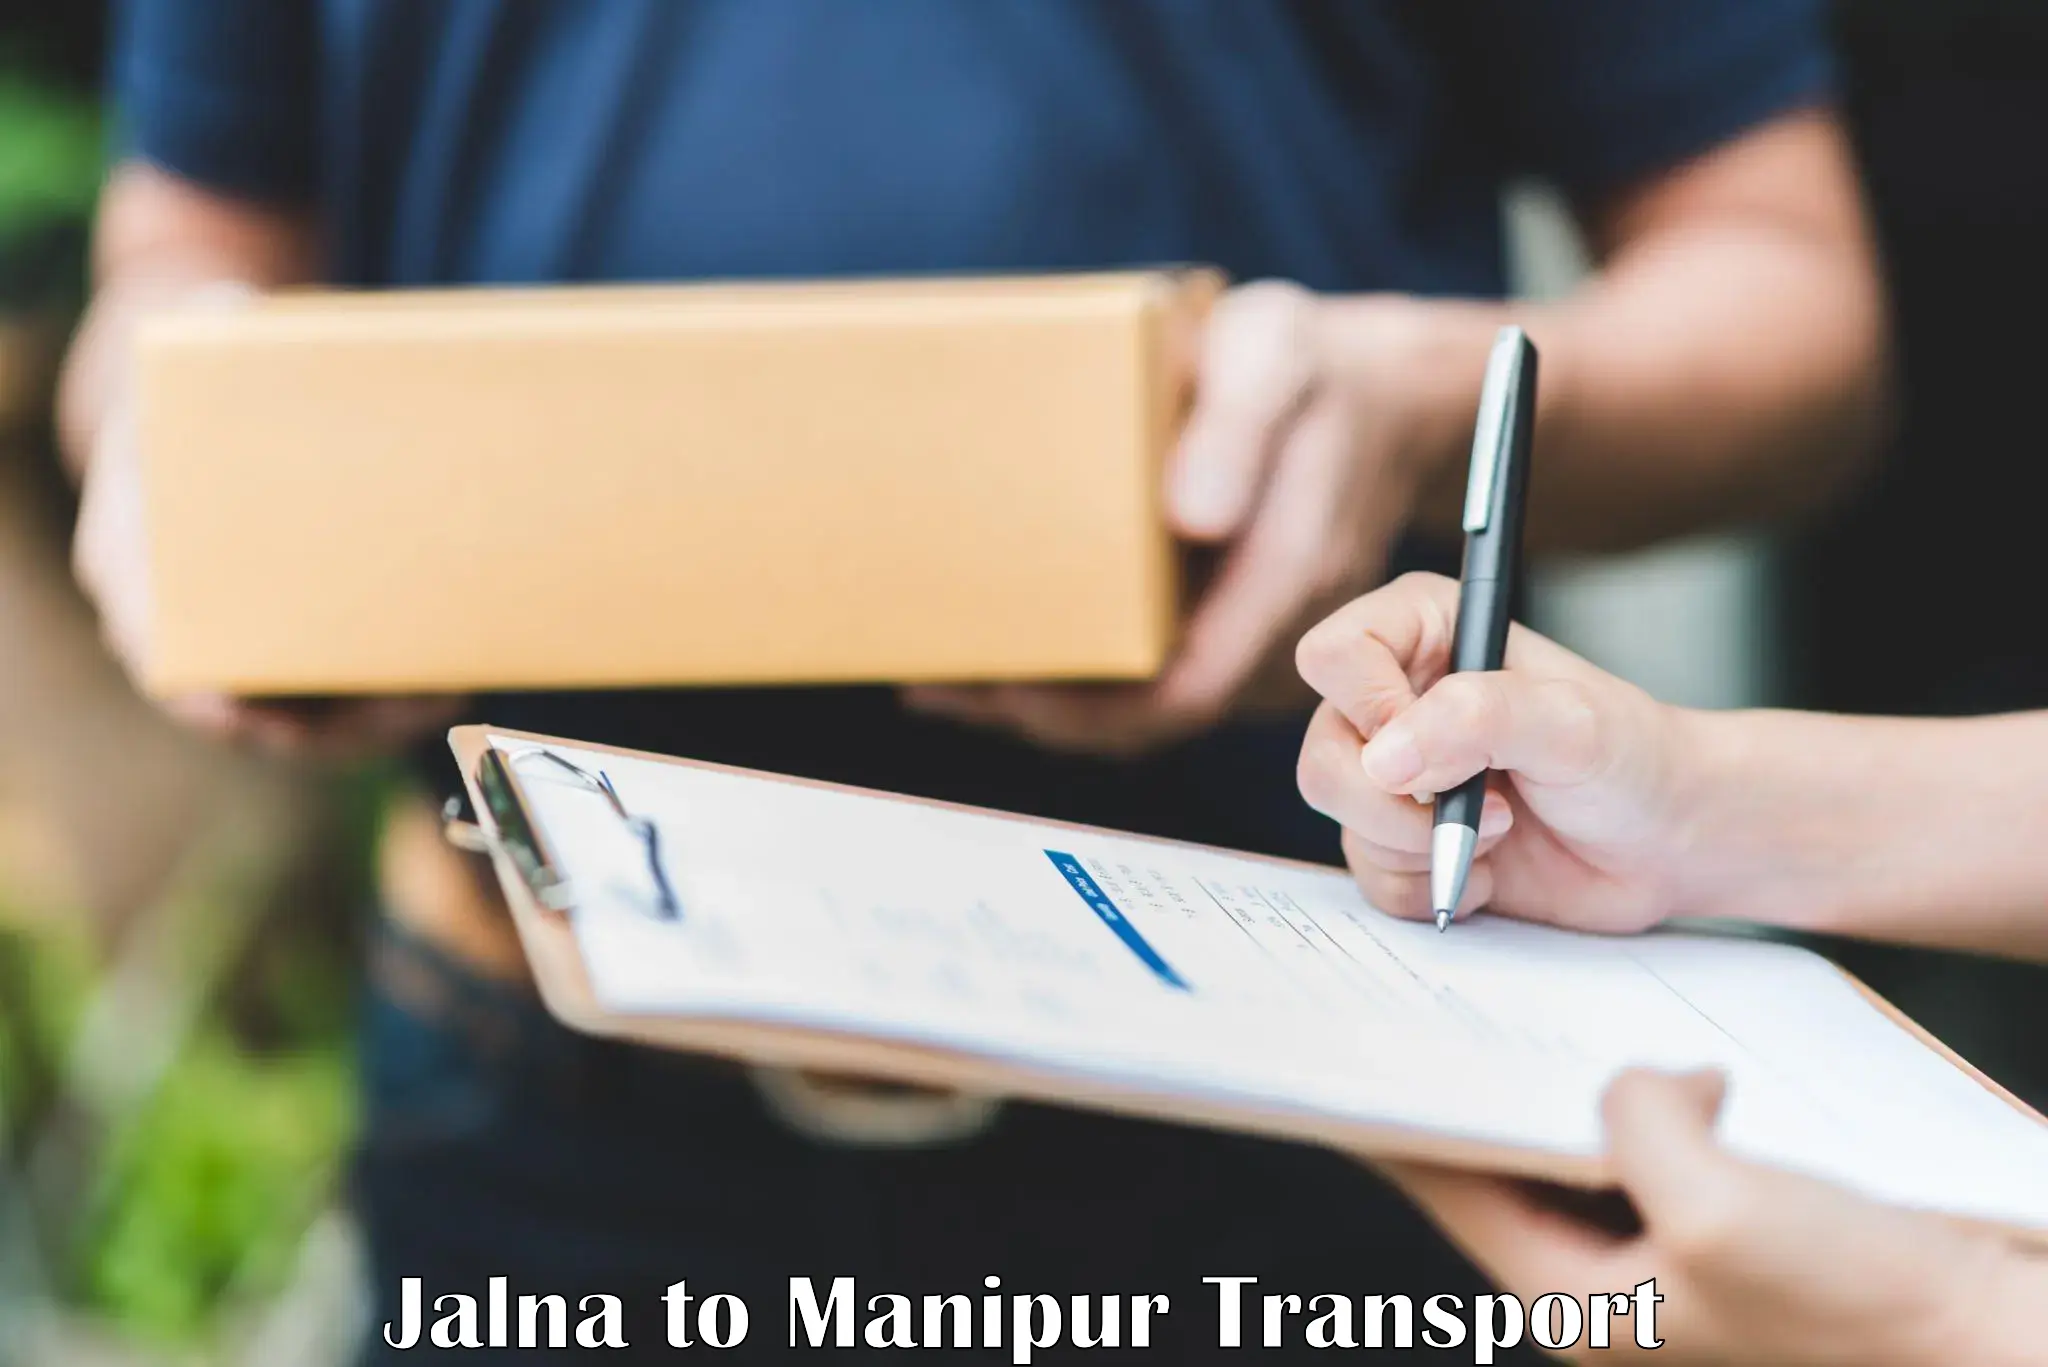 Delivery service Jalna to Imphal